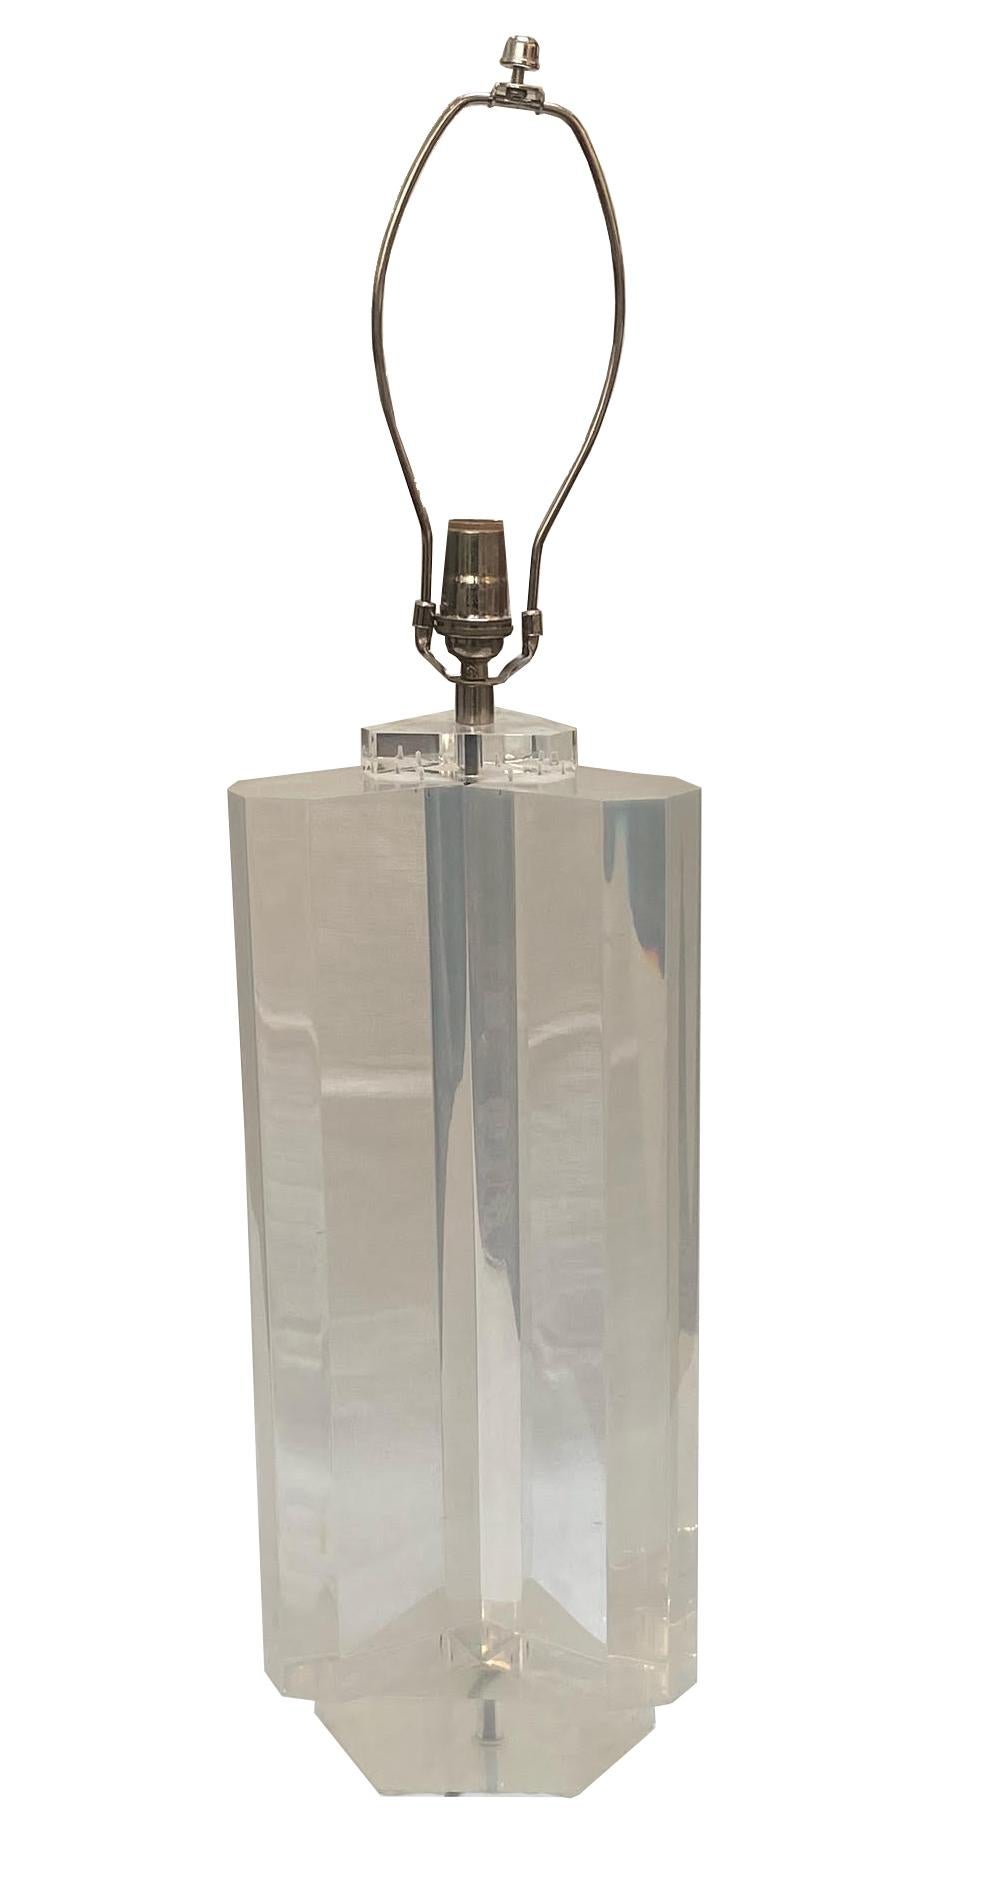 Super chic, handsome lamp perfect for any transitional space!

Dimensions: 25